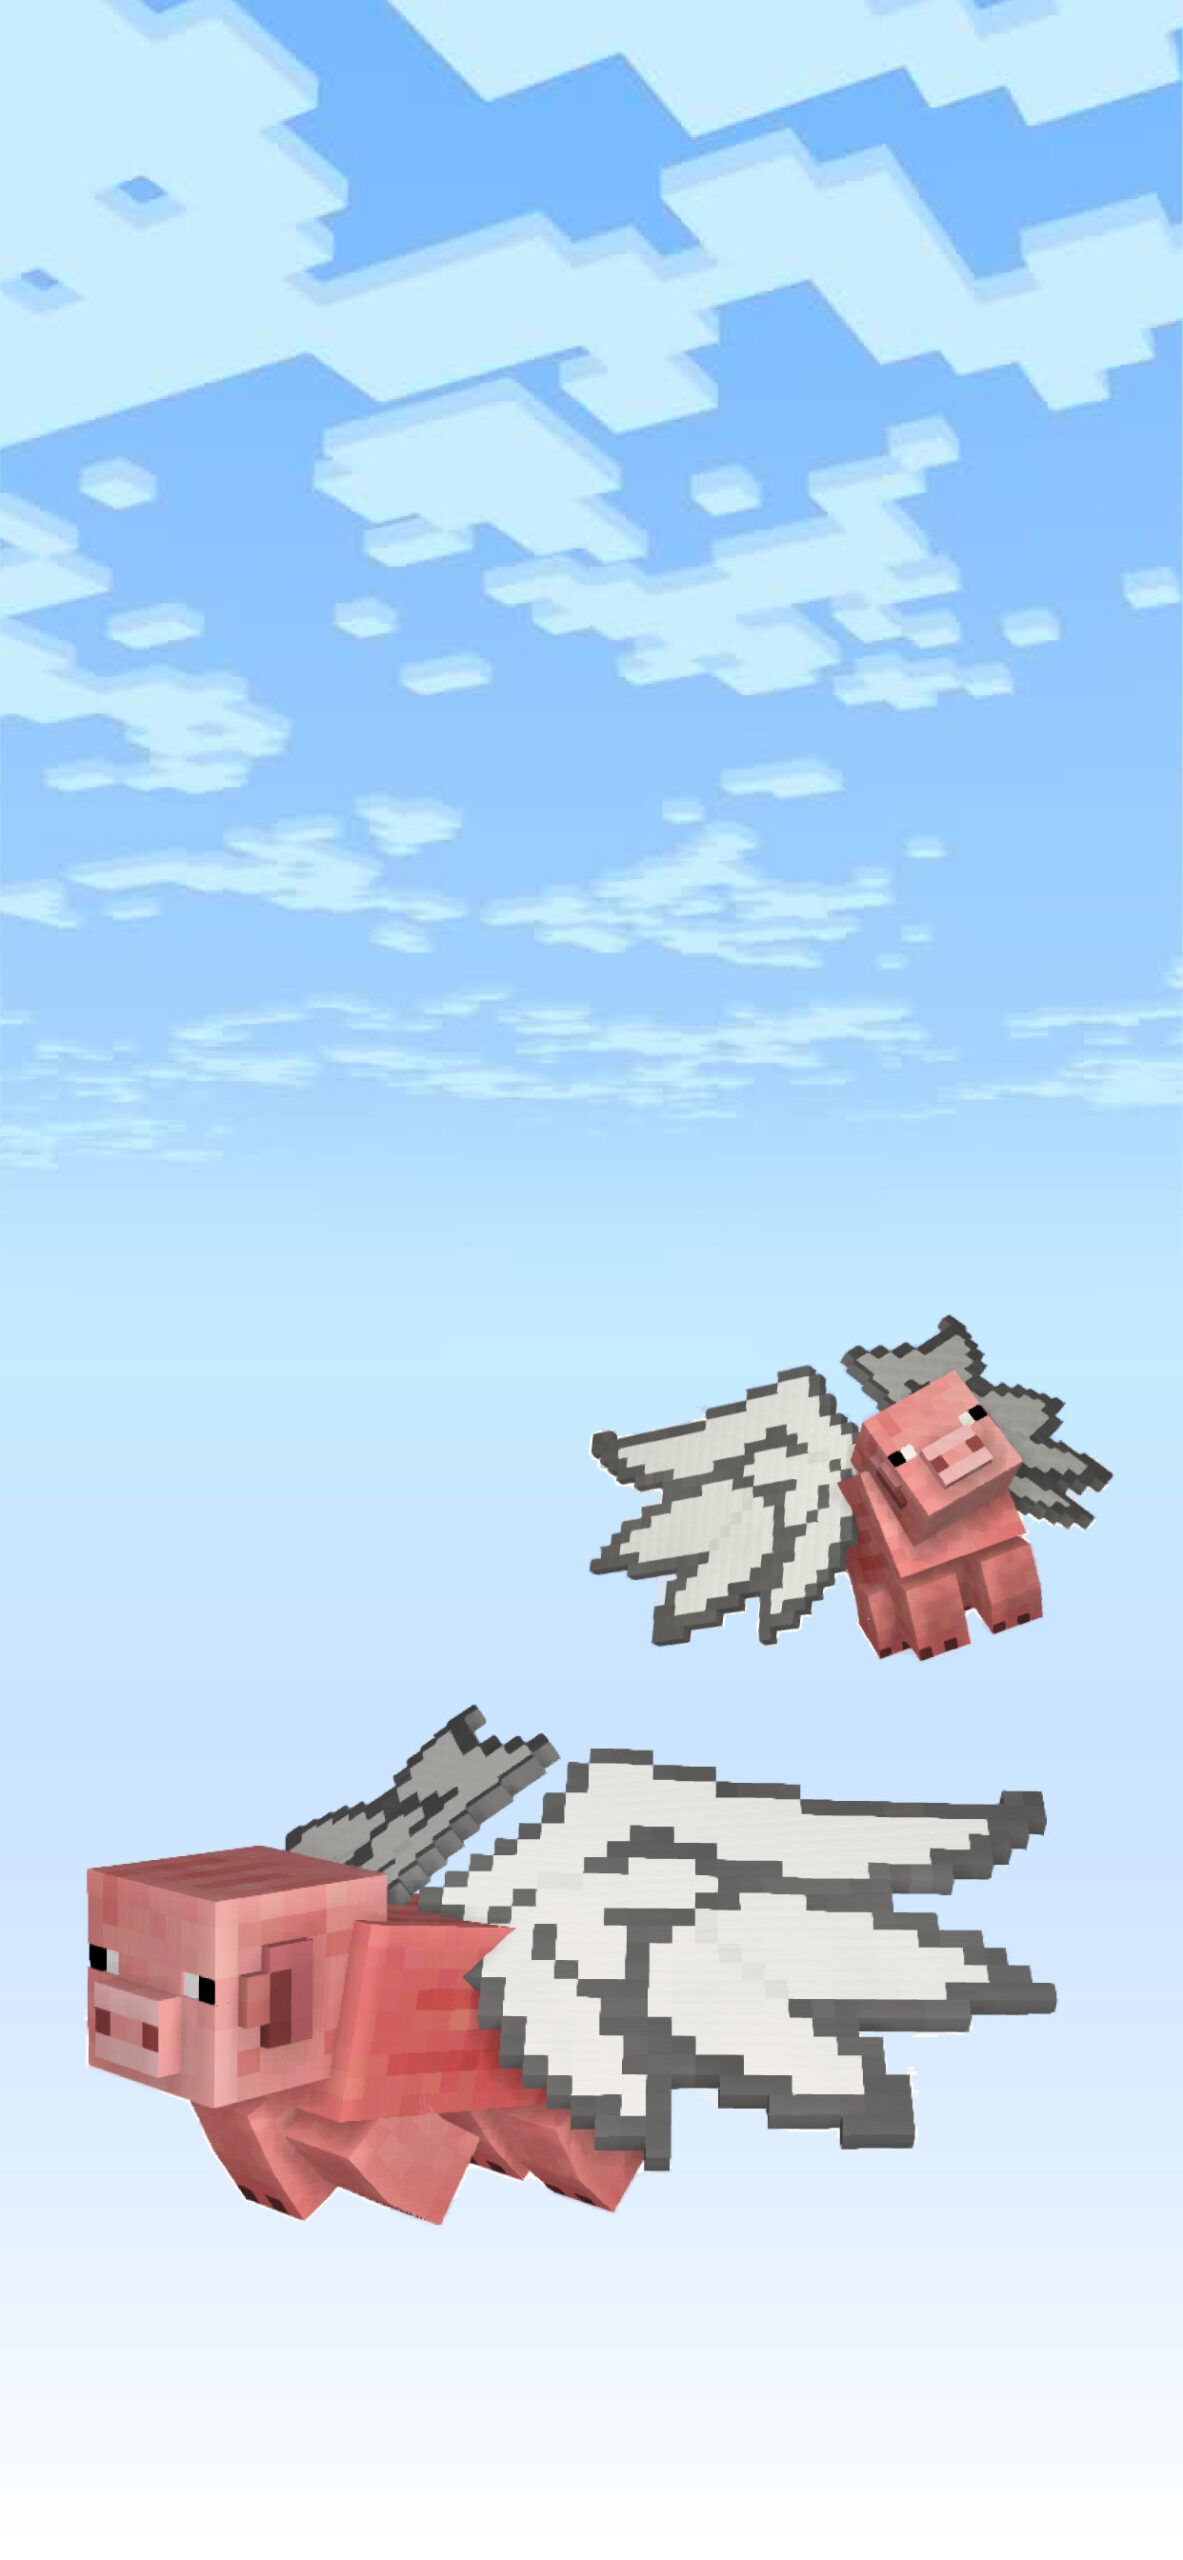 A picture of two pigs flying in the sky - Minecraft